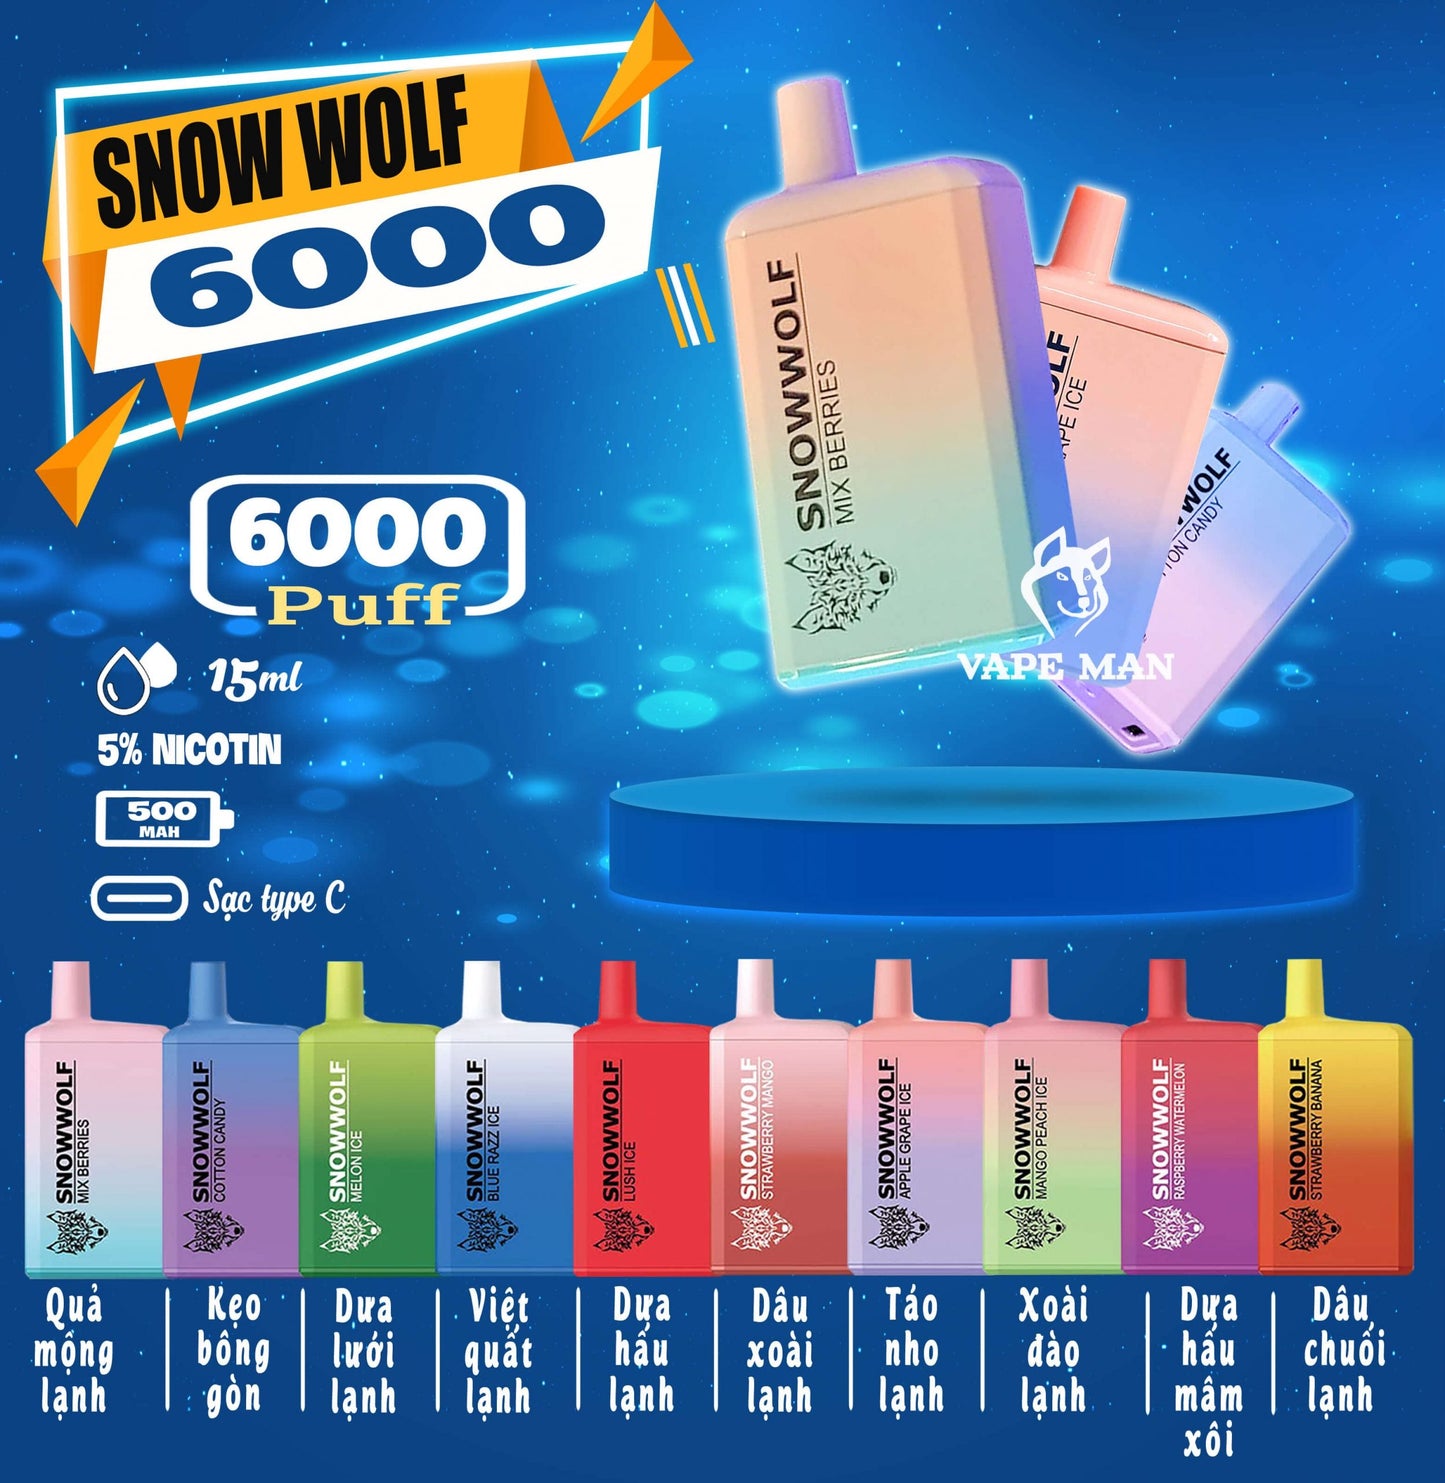 SNOWWOLF 6000 RECHARGEABLE DISPOSABLE